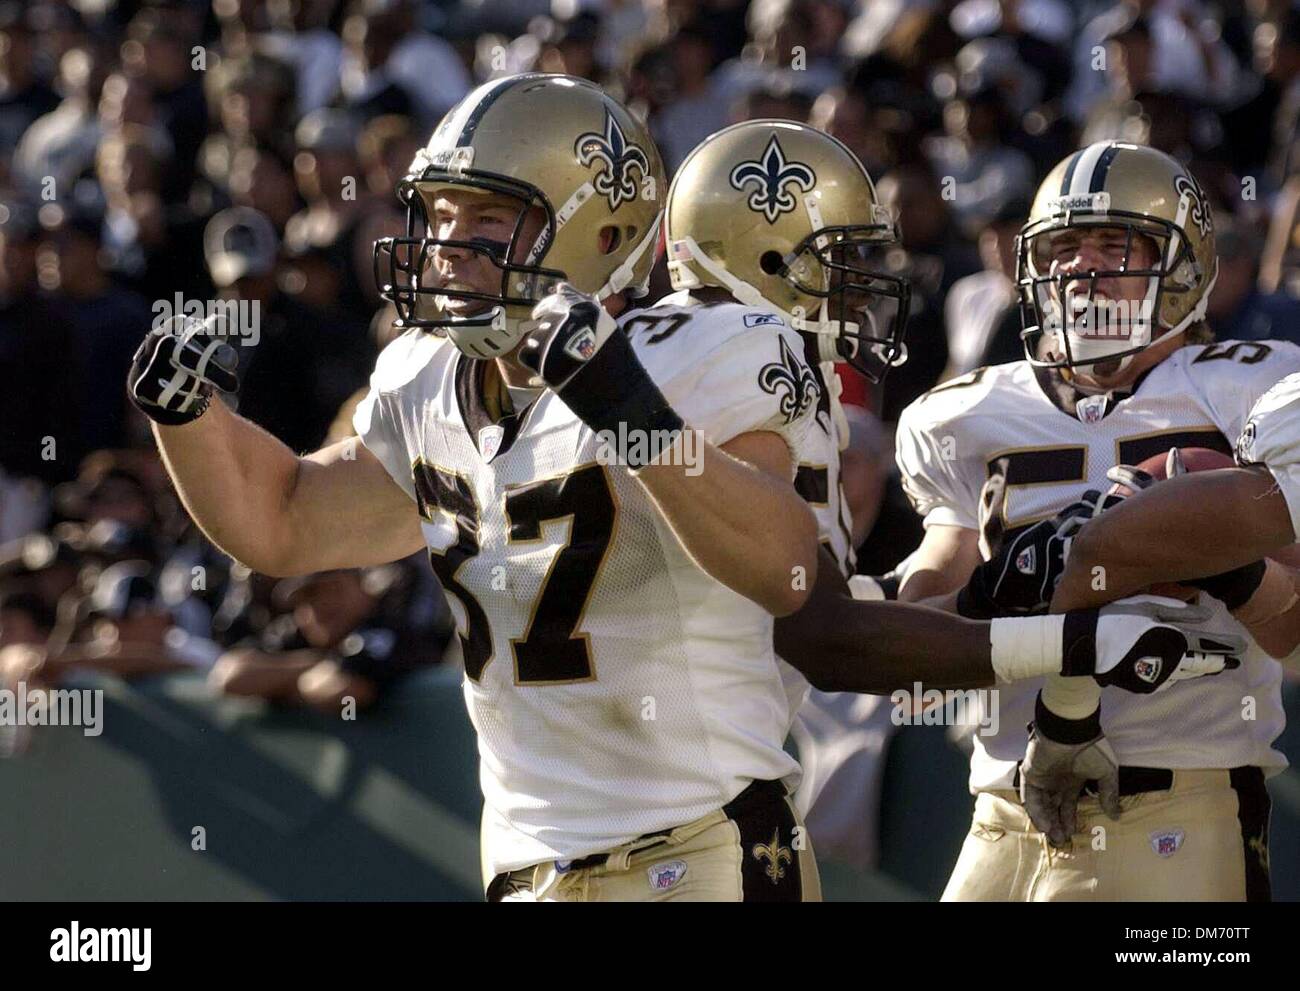 New Orleans Saints Steve Gleason 37, and Colby Bockwoldt 57 who recovered Oakland Raiders Carlos Francis fumble for a New Orleans touchdown in the 4th quarter celebrate in the endzone at Network Associates Coliseum Sunday  October 25, 2004 in Oakland, California.  The Saints won 31-26. Sacramento Bee Photo /  Paul Kitagaki Jr./ZUMA Press Stock Photo